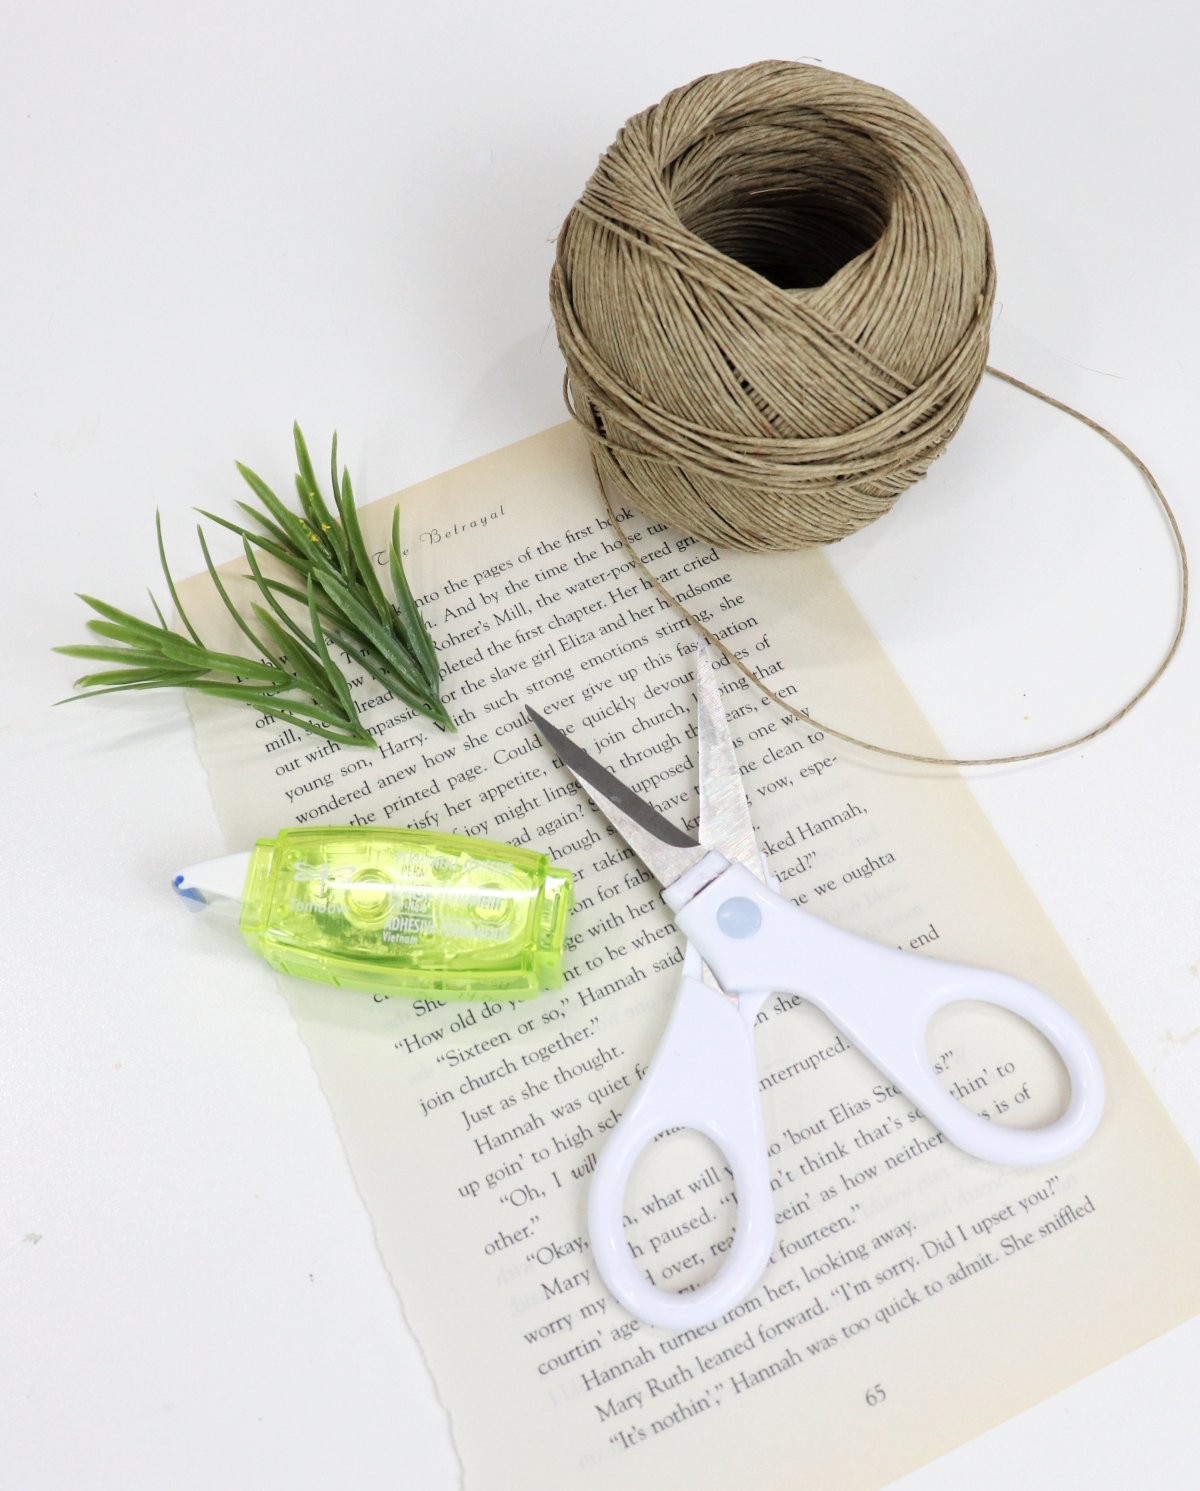 Image contains a book page, a white handled pair of scissors, a roll of adhesive, faux greenery, and a roll of jute on a white table.